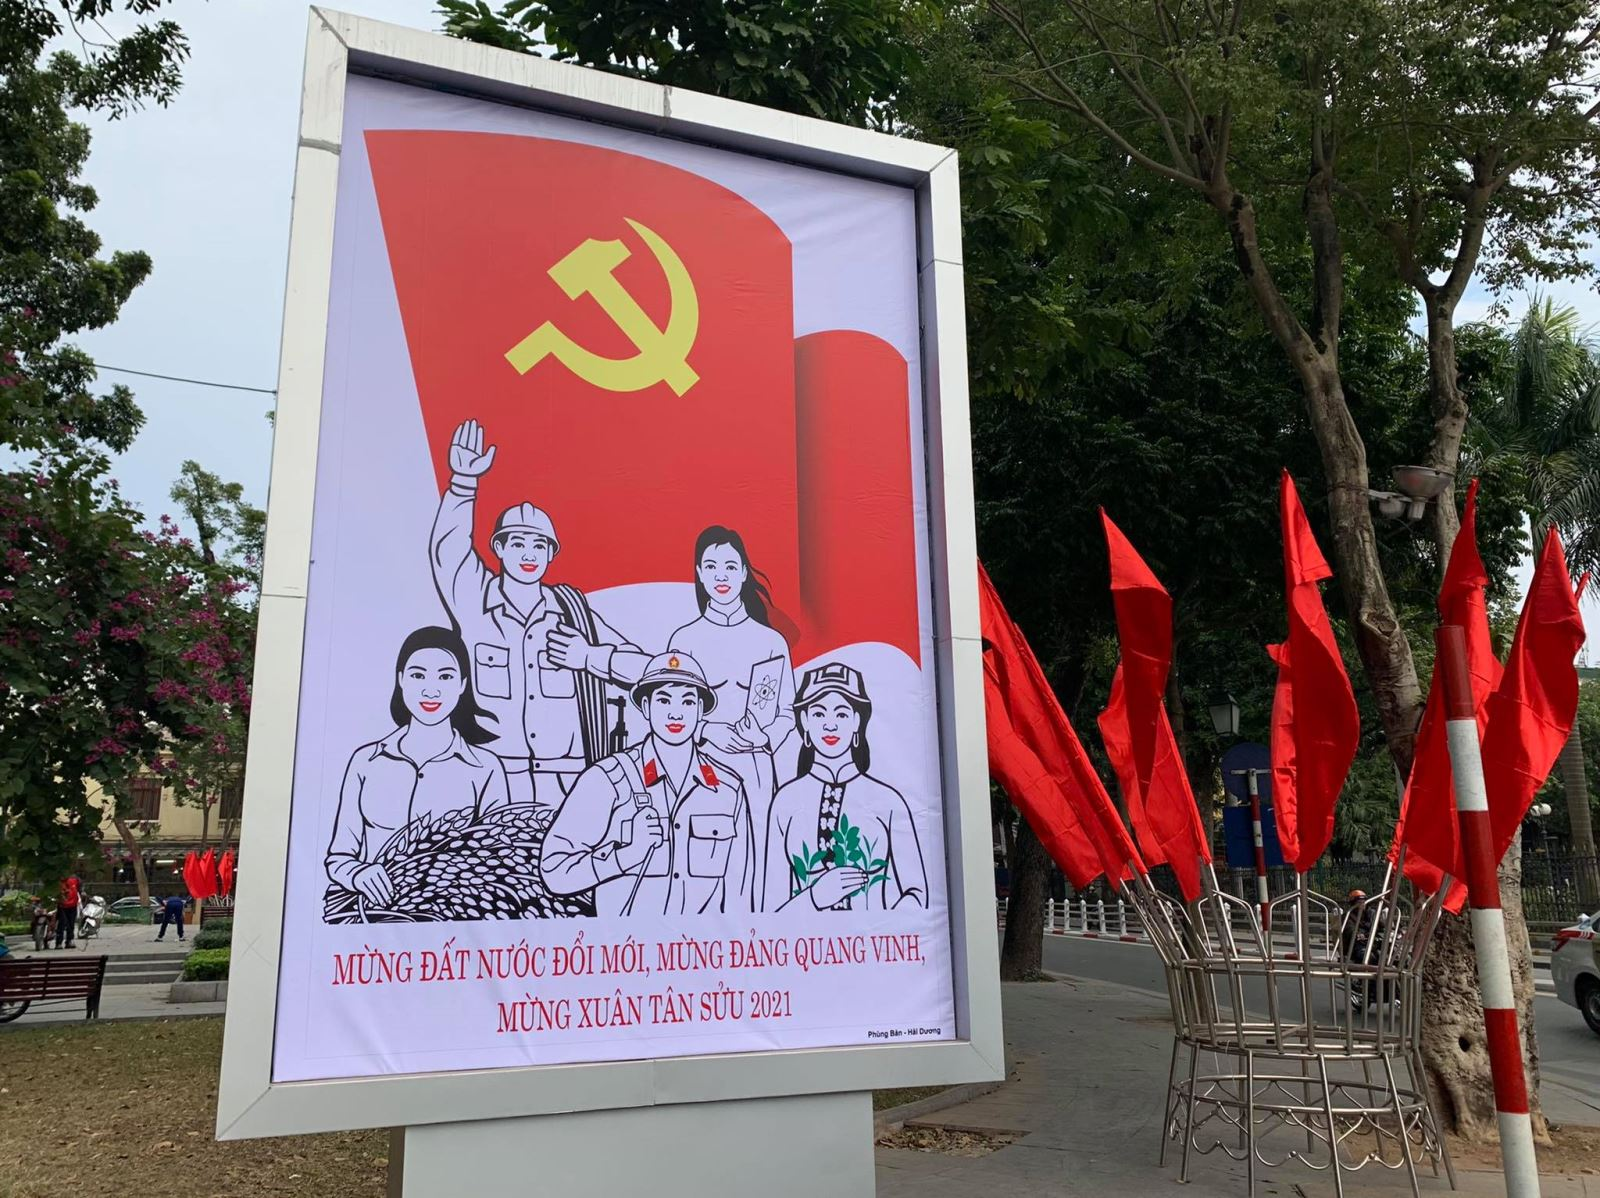 Hanoi streets brilliantly decorated to welcome 13th National Party Congress